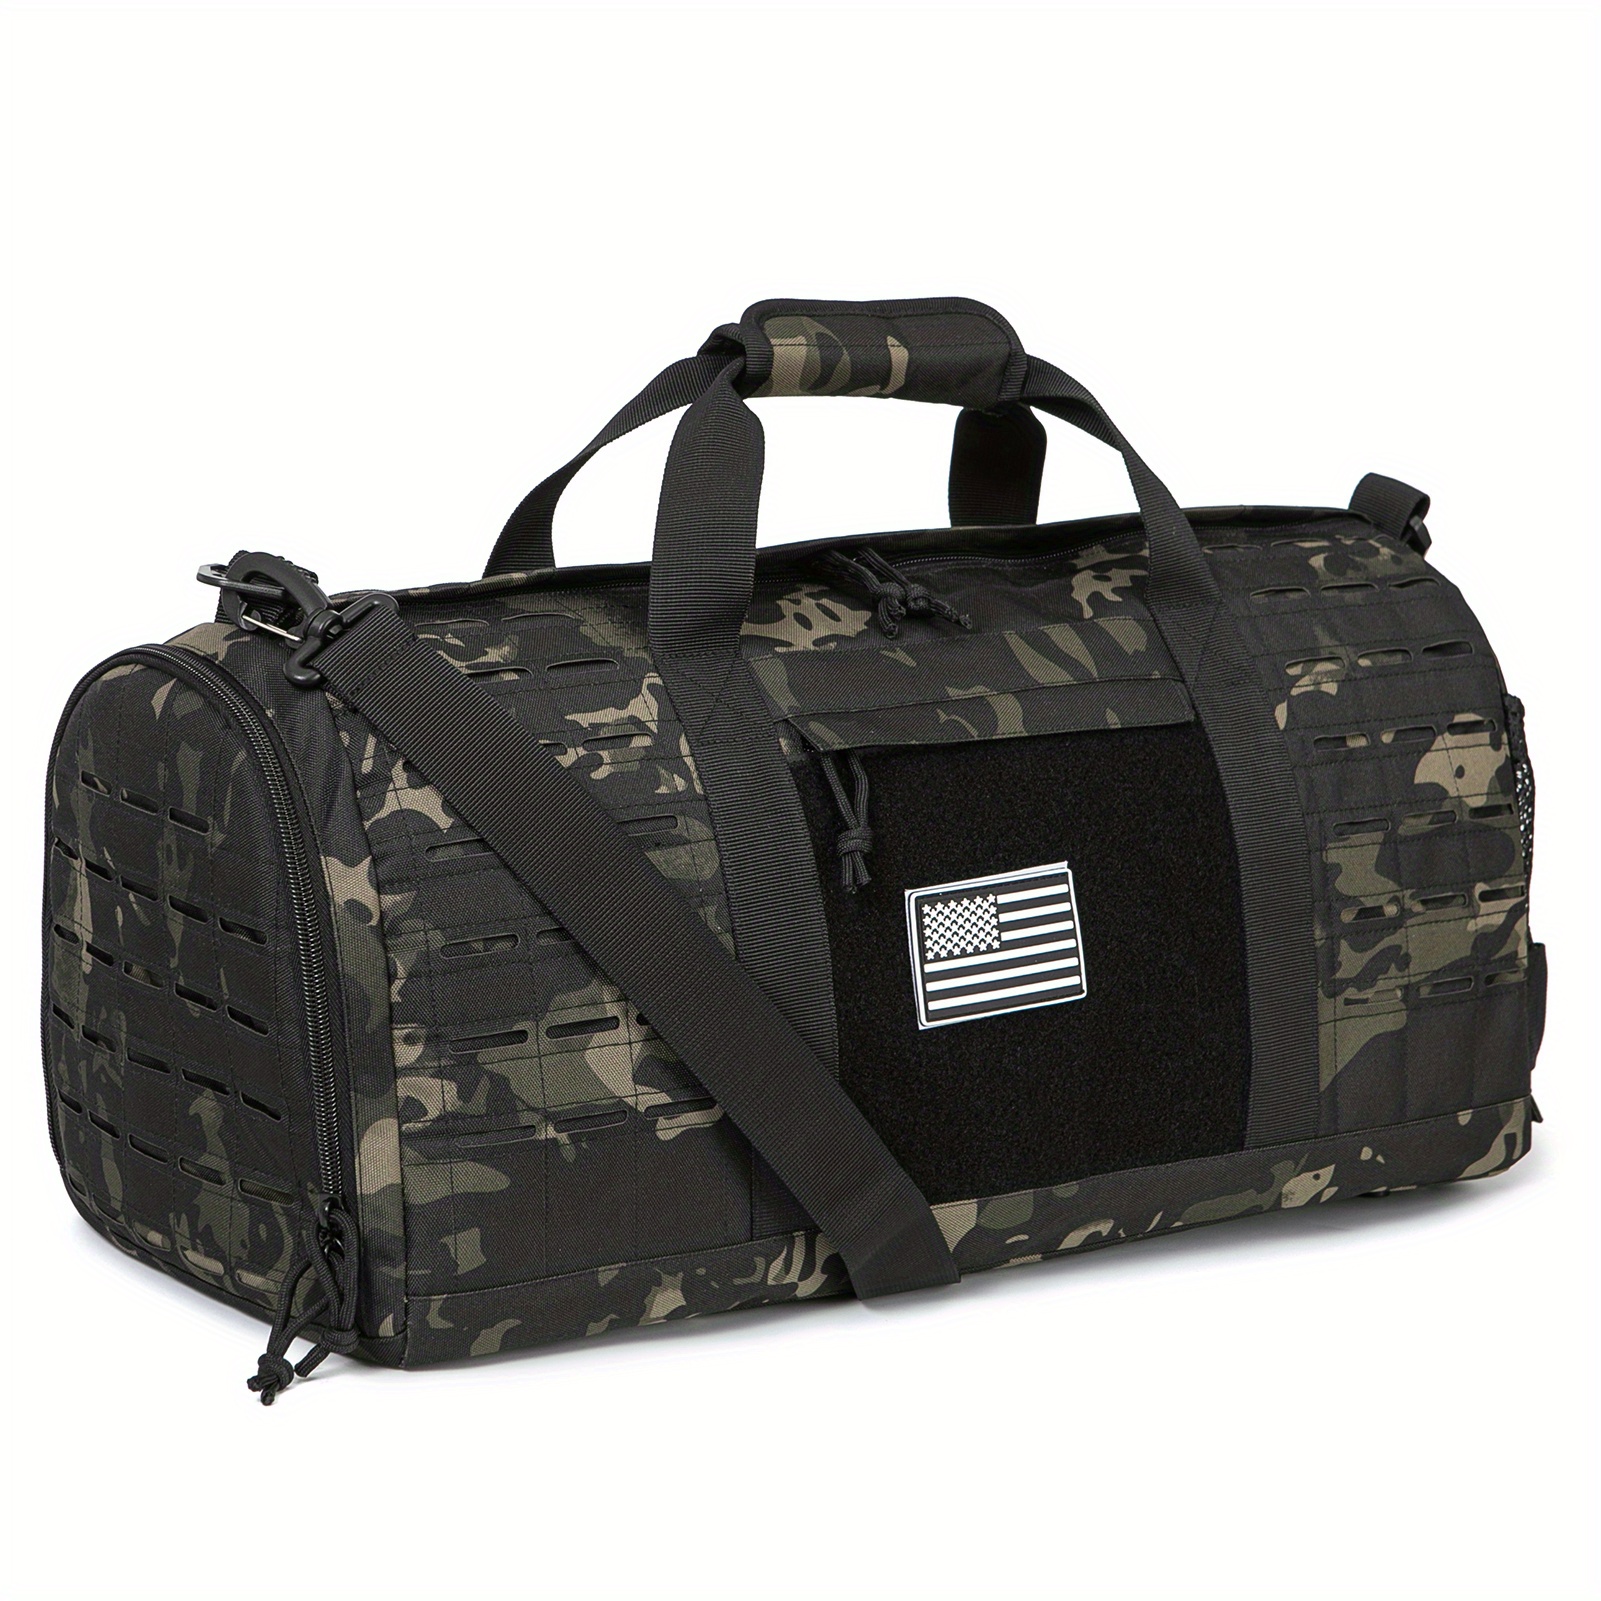 

Duffel Bag, 40l Sports Gym Bag, Weekender Travel Bag With Basketball Storage, Fitness Training Carry-on, Camo Design Luggage Bag